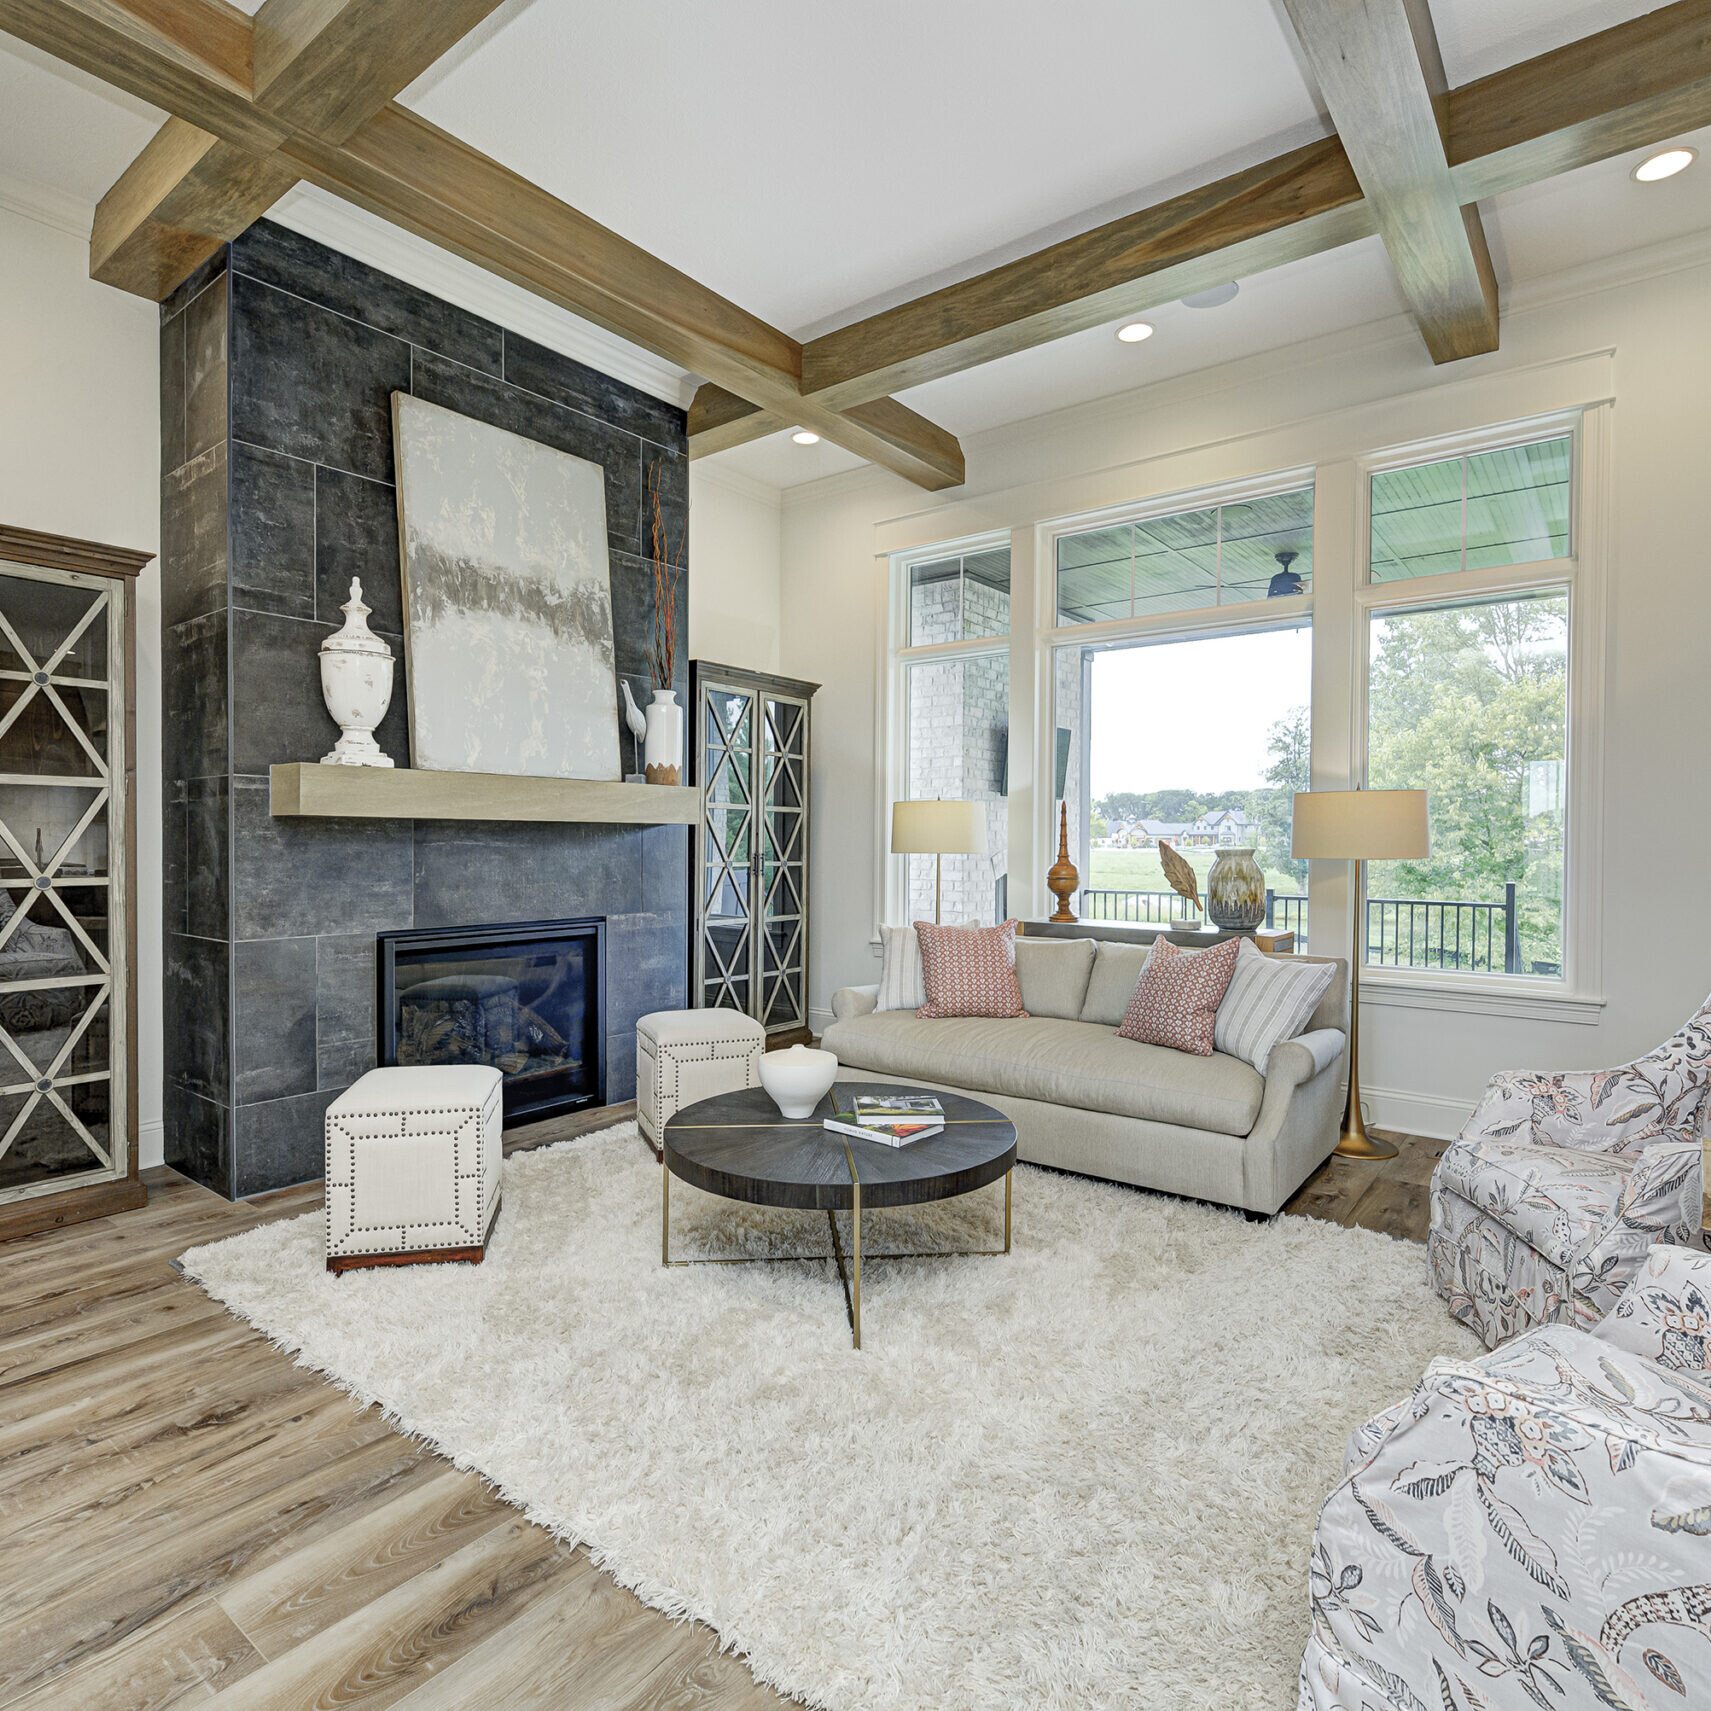 A living room with wood beams and a fireplace in a custom home.